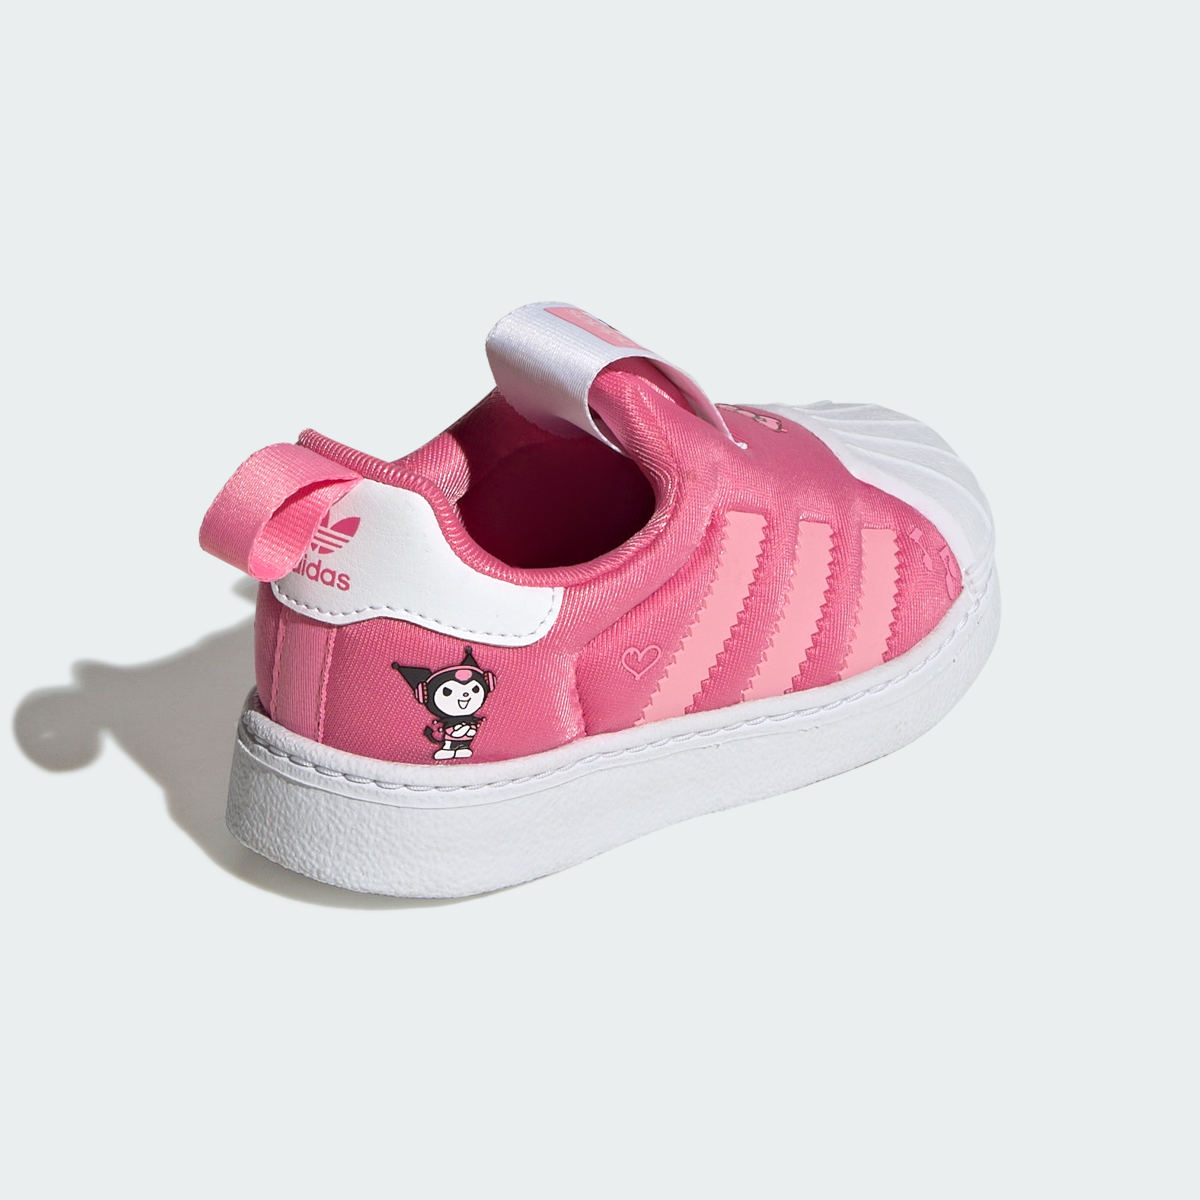 Adidas Originals x Hello Kitty and Friends Superstar 360 Shoes Kids. 6